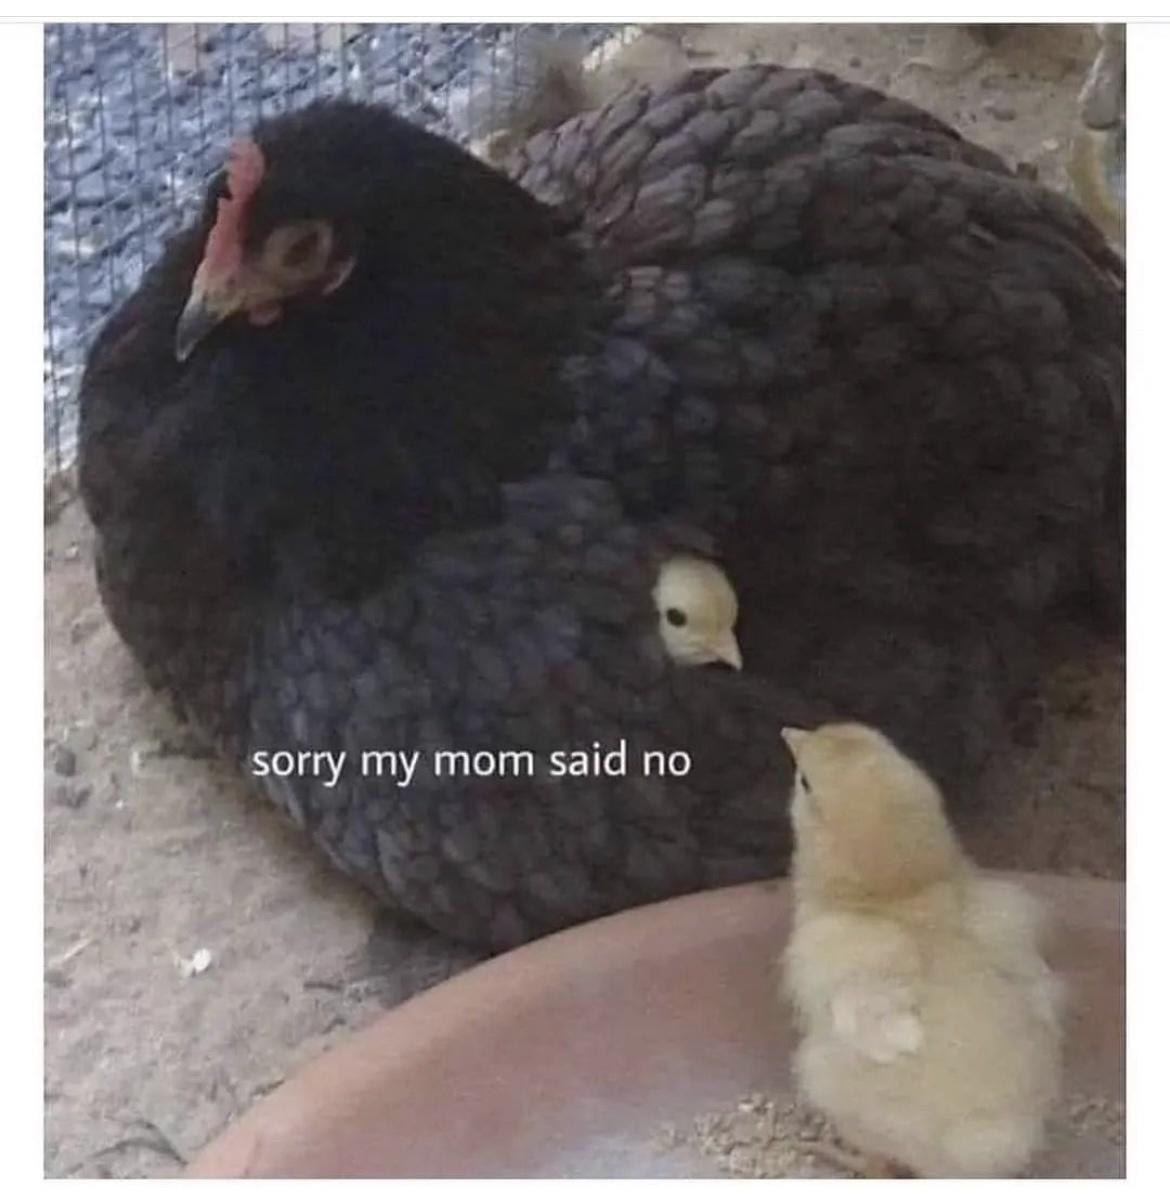 chick sitting under chicken's wing with another chick looking at it